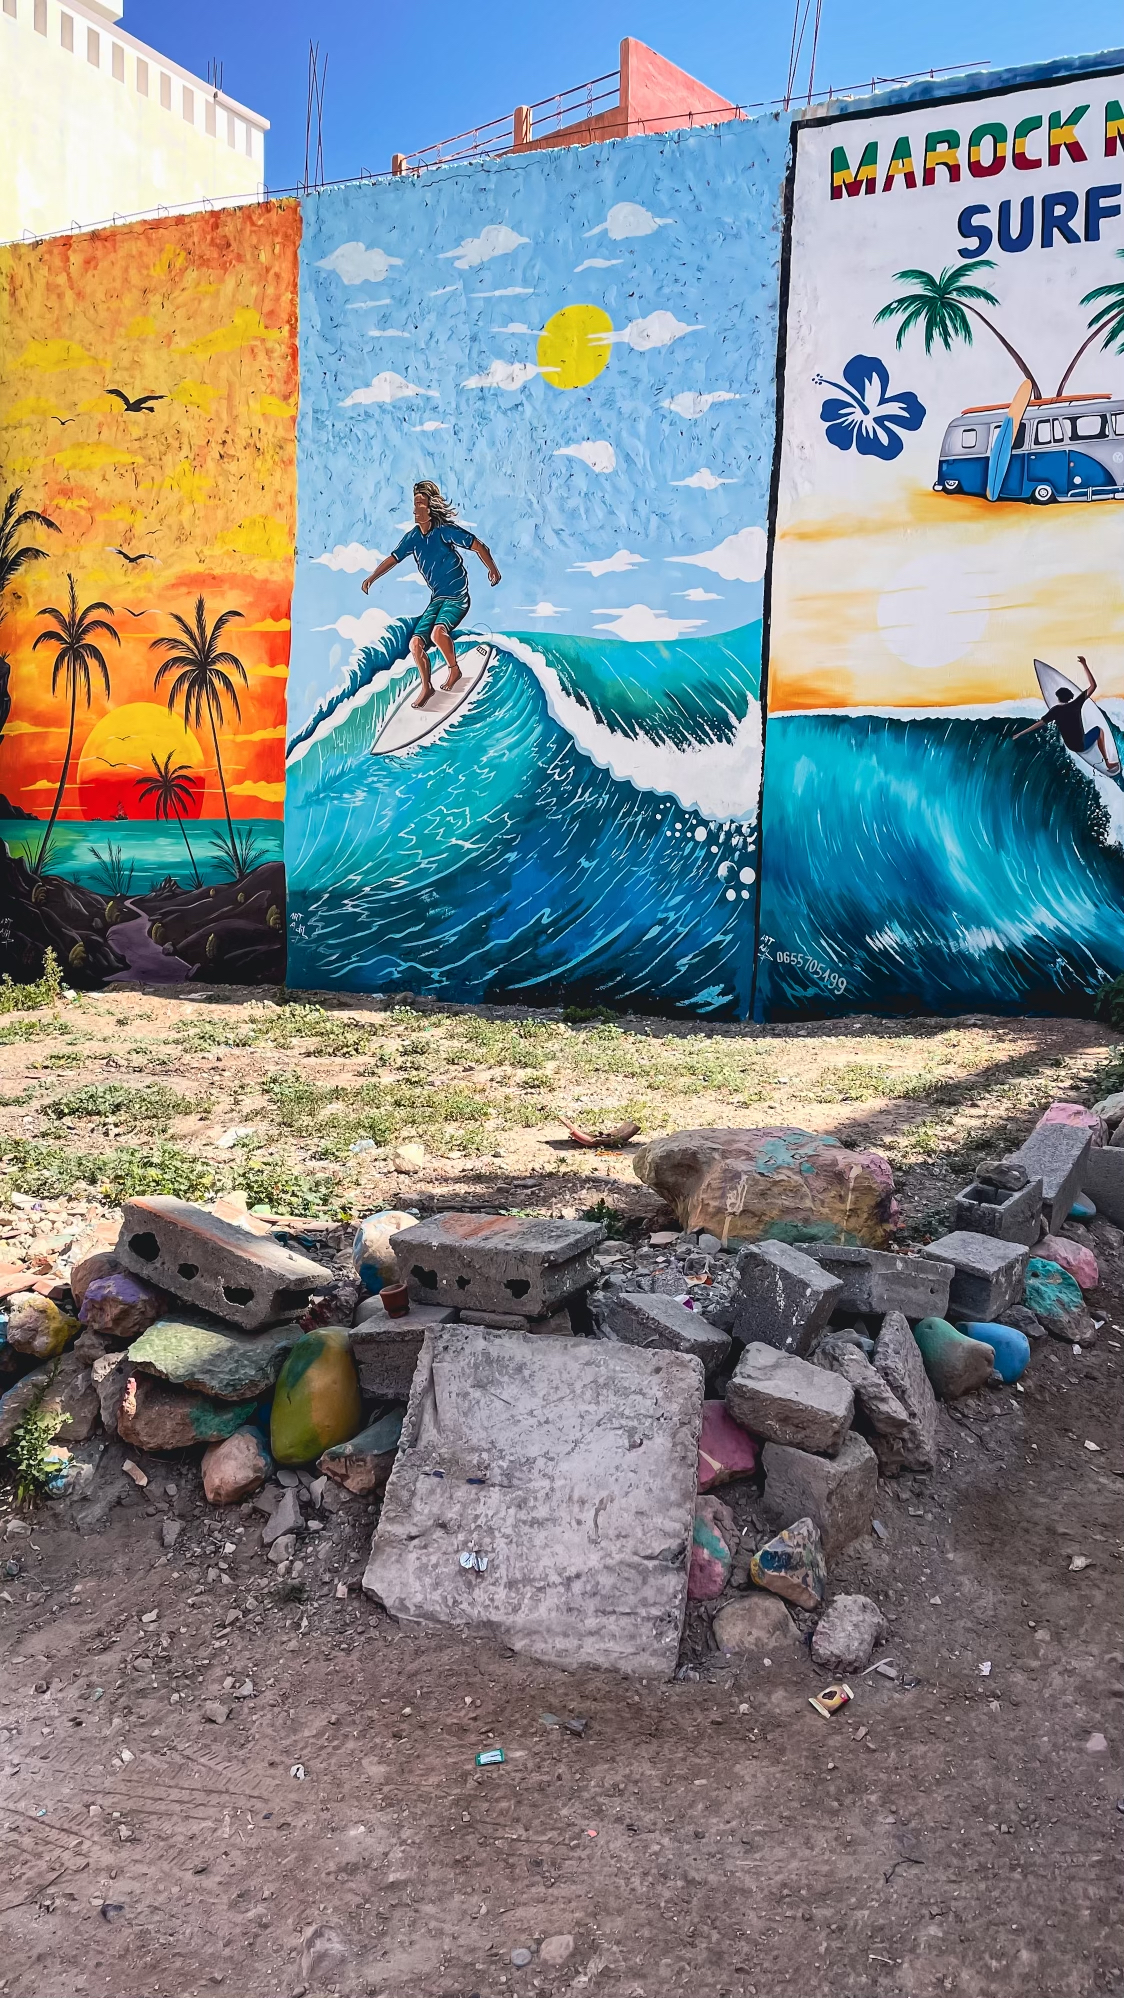 Colorful street art mural in Tamraght, Morocco, depicting a surfer riding a vibrant blue wave with tropical scenery and a retro van, showcasing the local surf culture and artistic spirit.